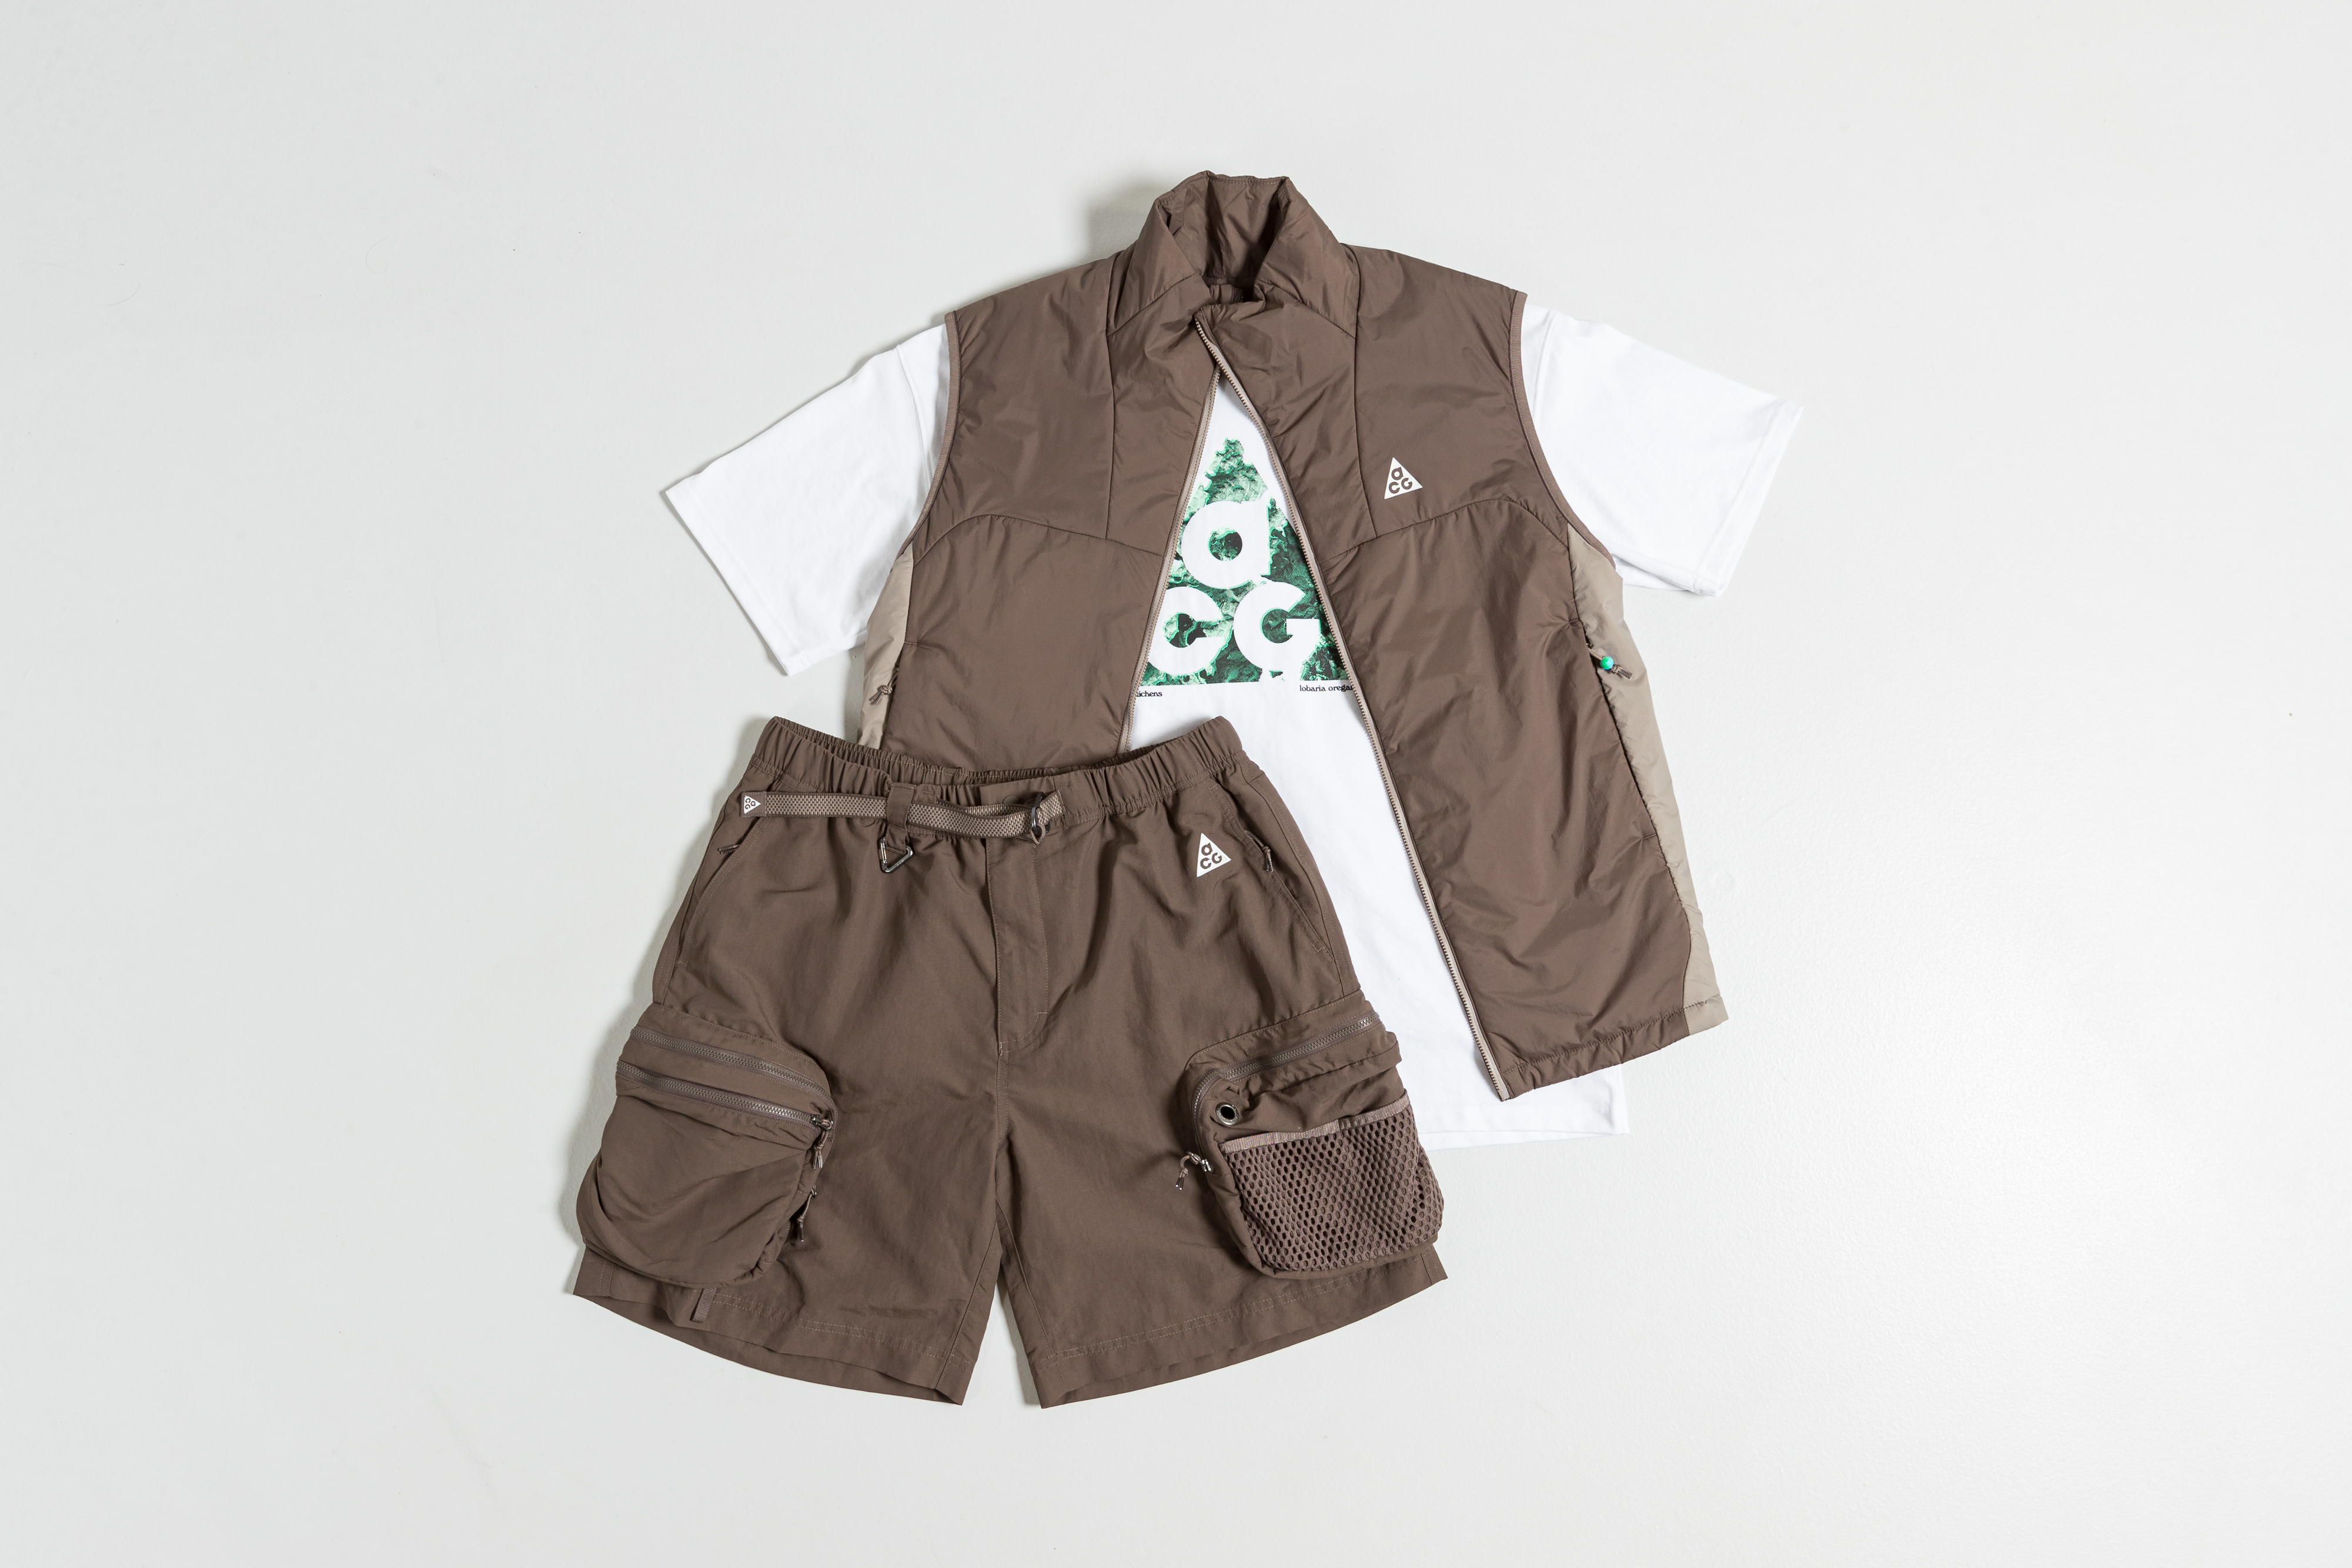 Up There Store - Take a Hike! with Nike ACG